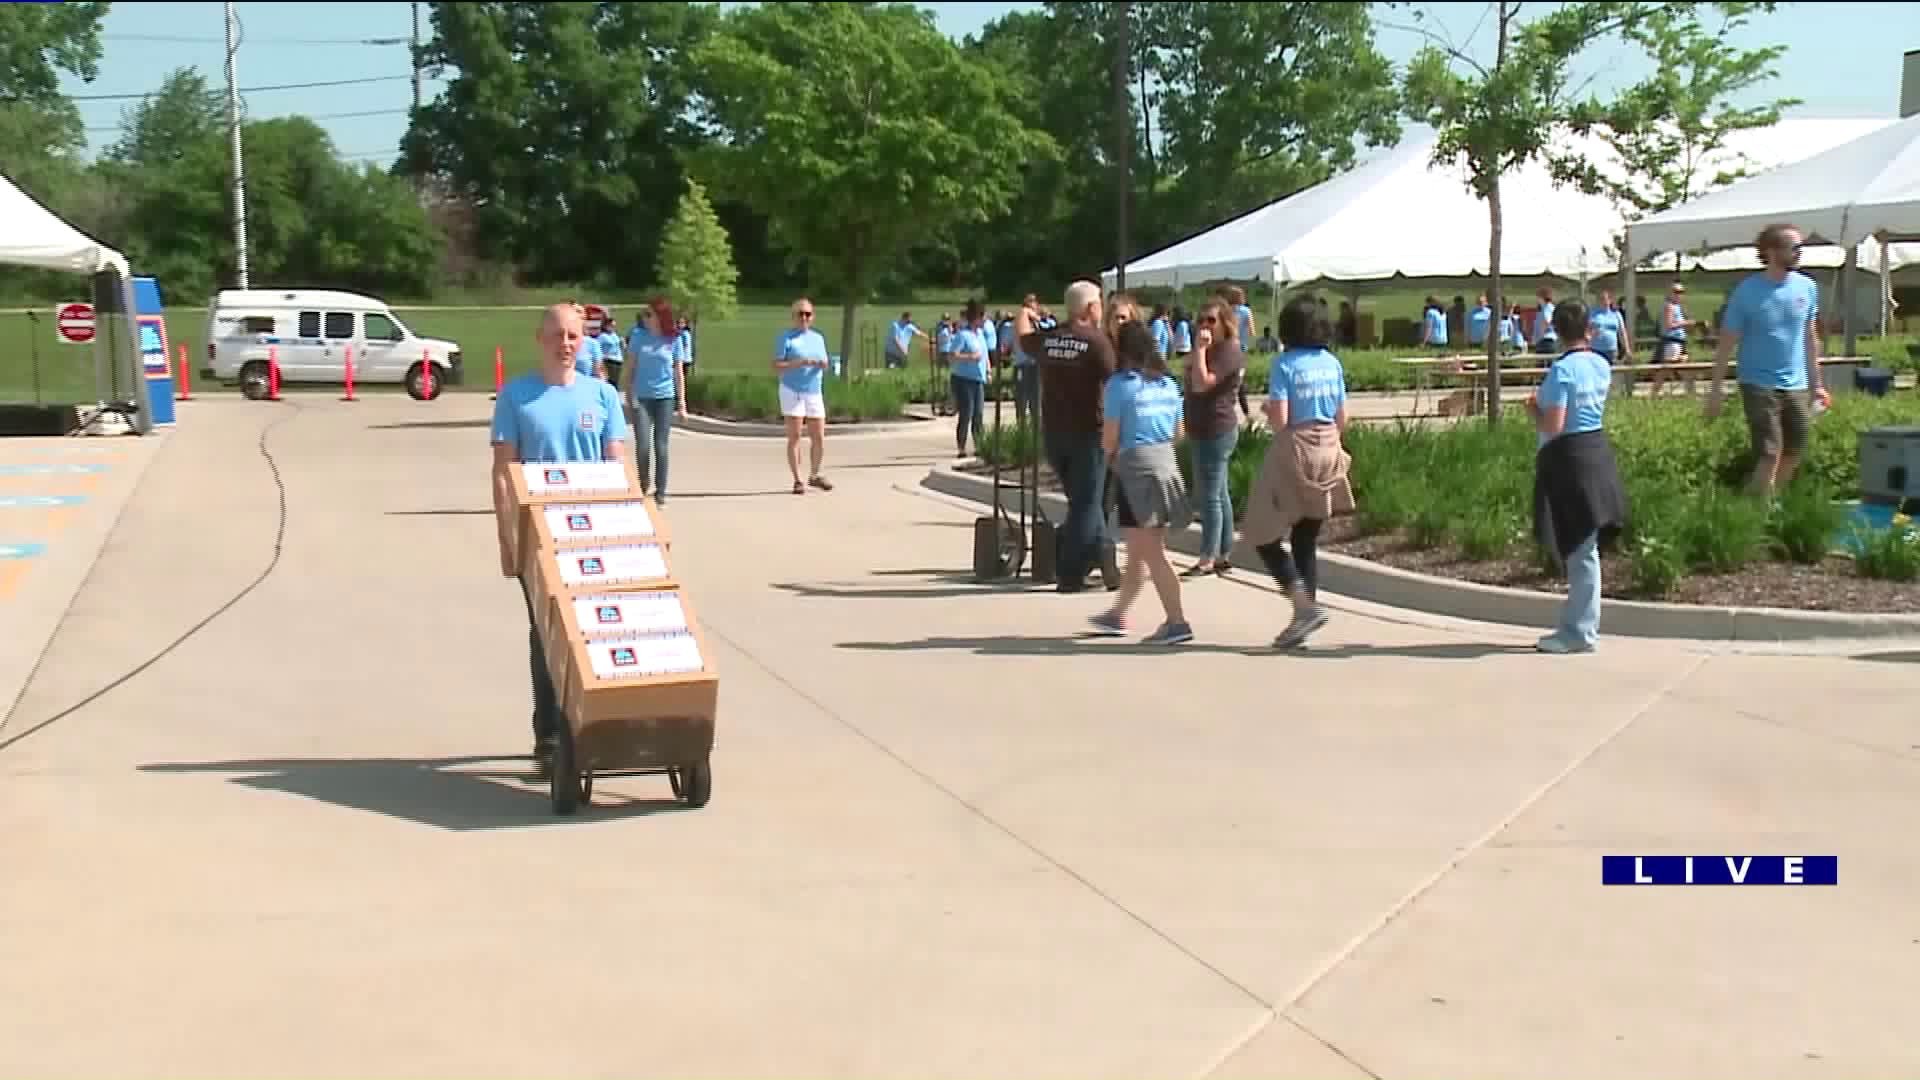 Around Town checks out the 2nd Annual Disaster Relief Community Volunteer event at Aldi Corporate Headquarters